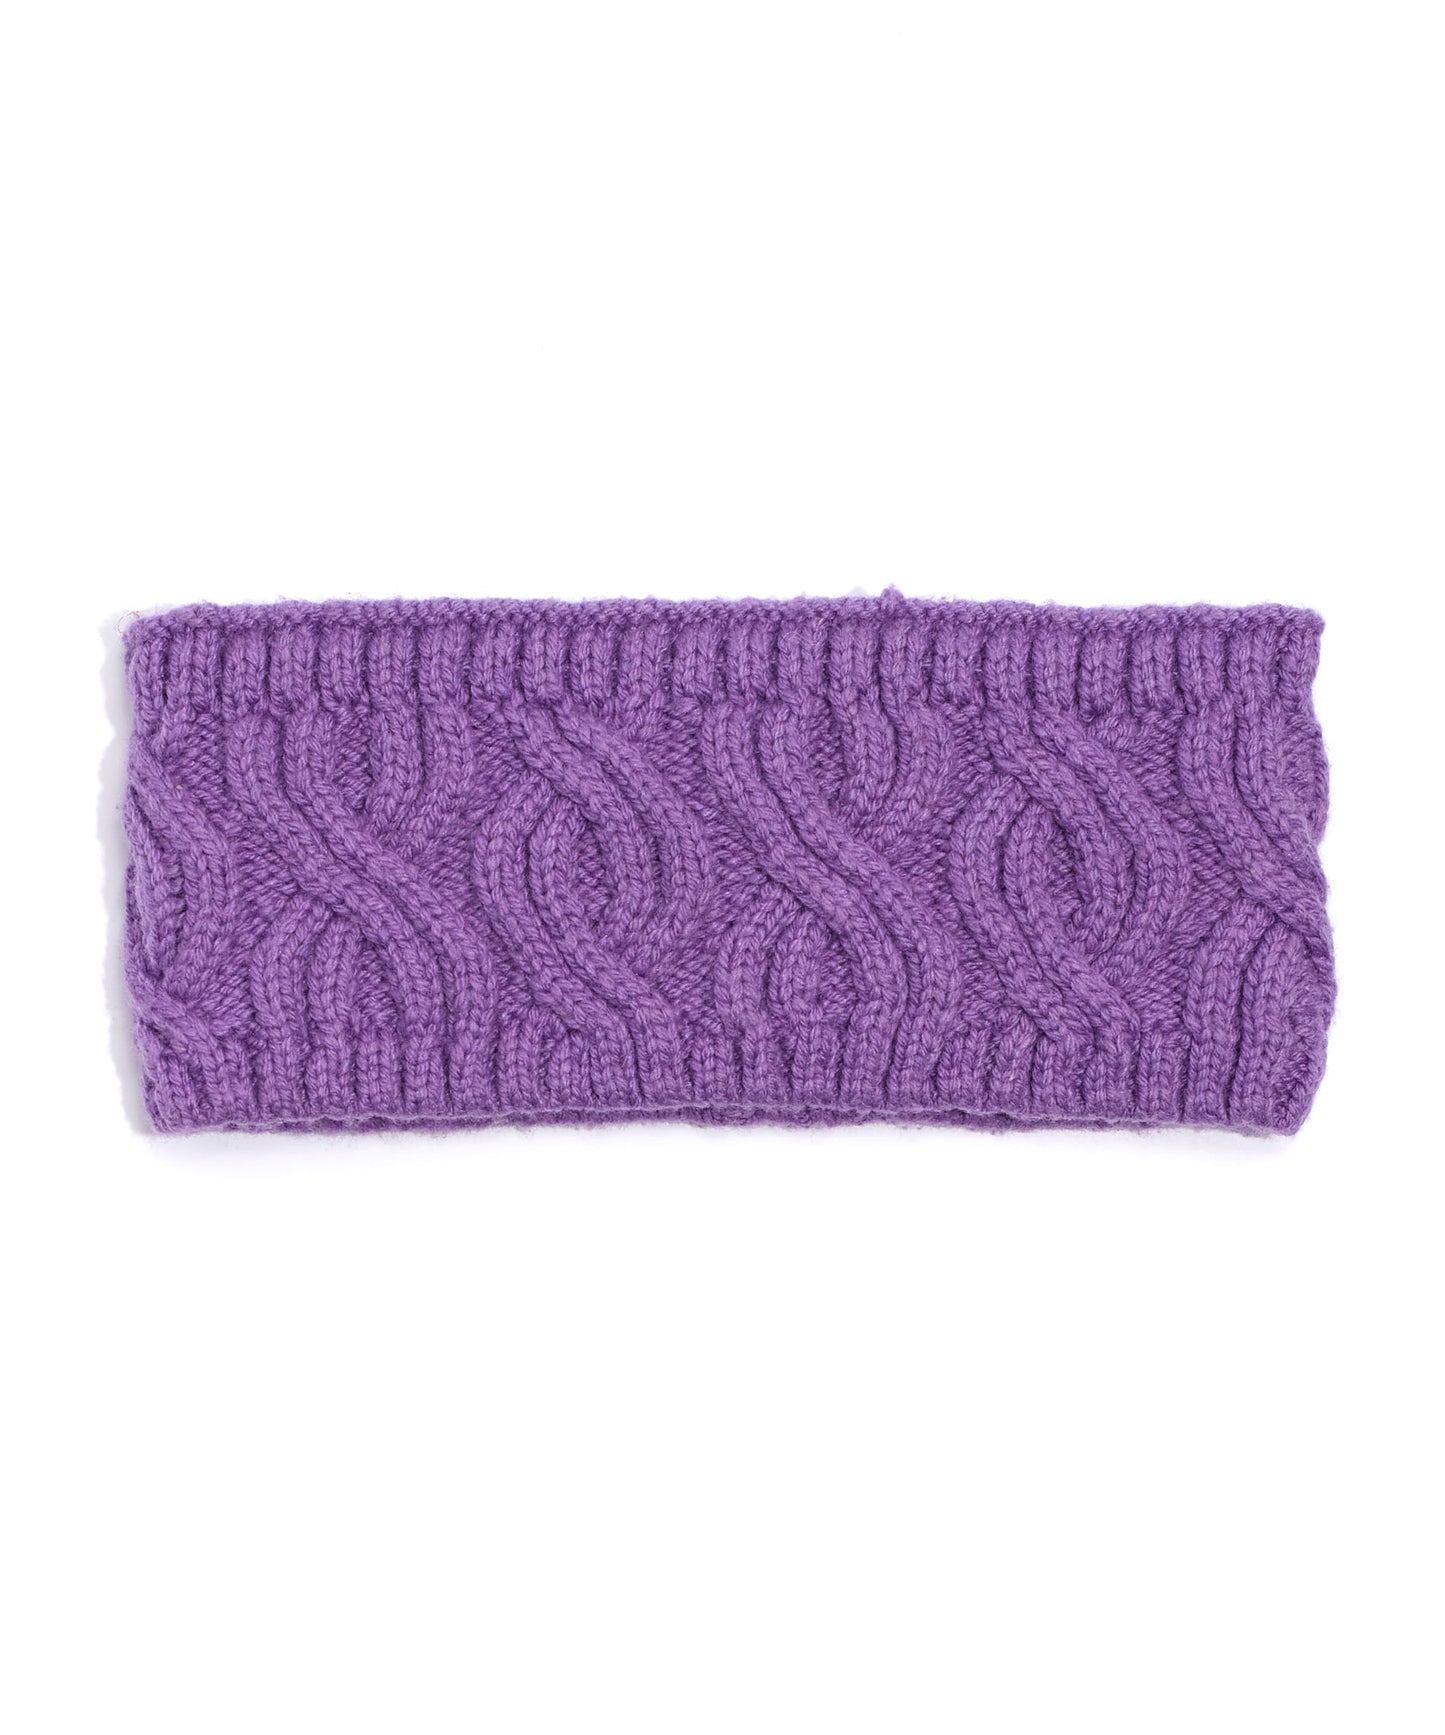 Recycled Headband in color Amethyst